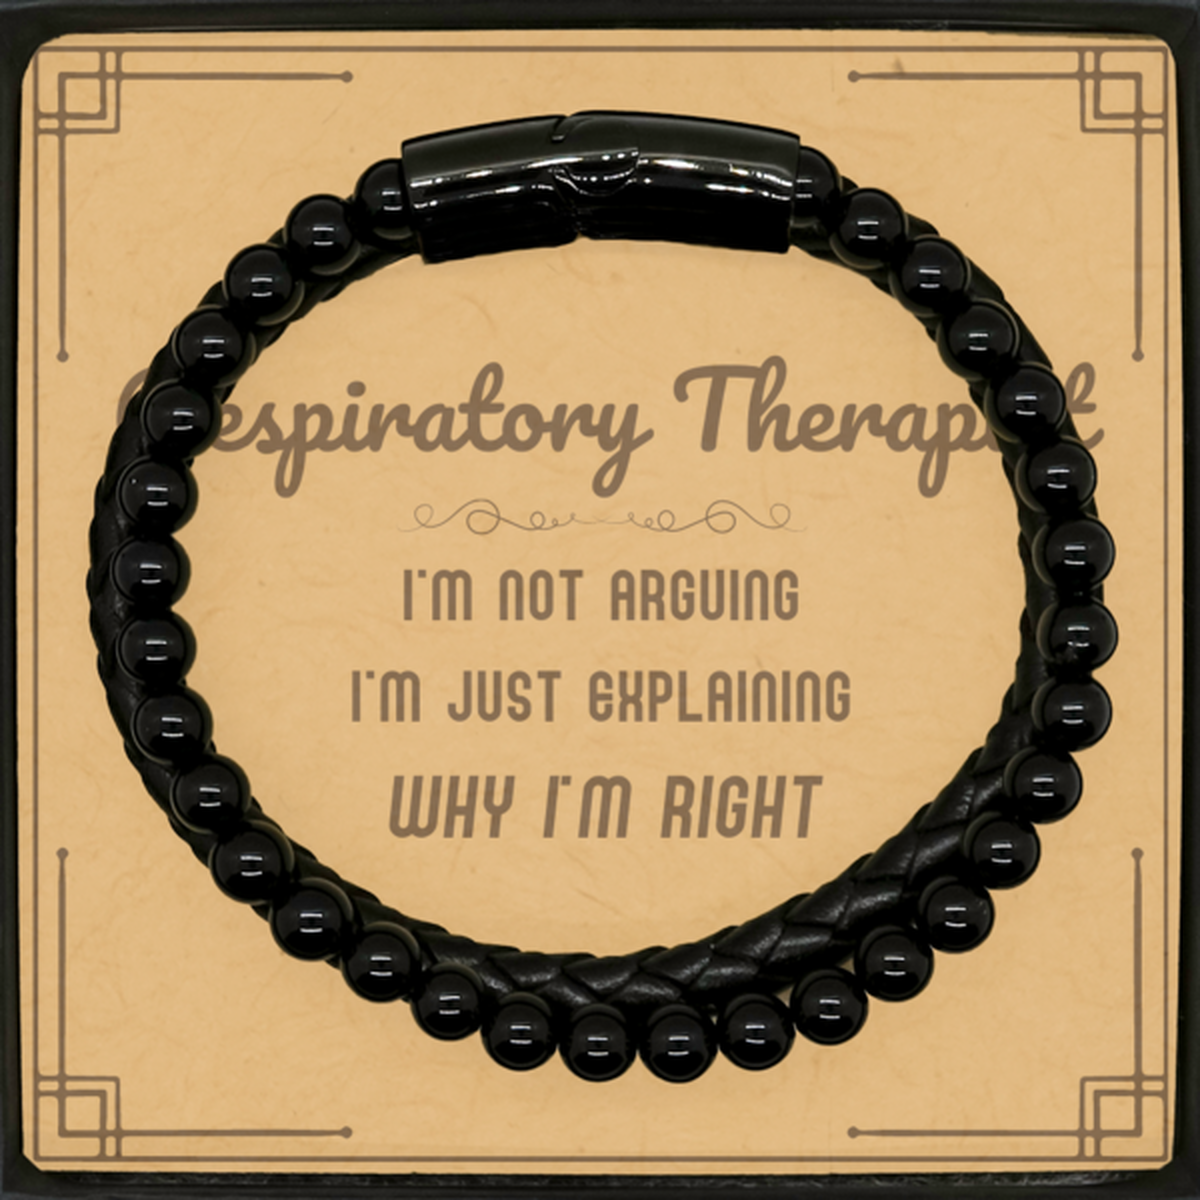 Respiratory Therapist I'm not Arguing. I'm Just Explaining Why I'm RIGHT Stone Leather Bracelets, Funny Saying Quote Respiratory Therapist Gifts For Respiratory Therapist Message Card Graduation Birthday Christmas Gifts for Men Women Coworker